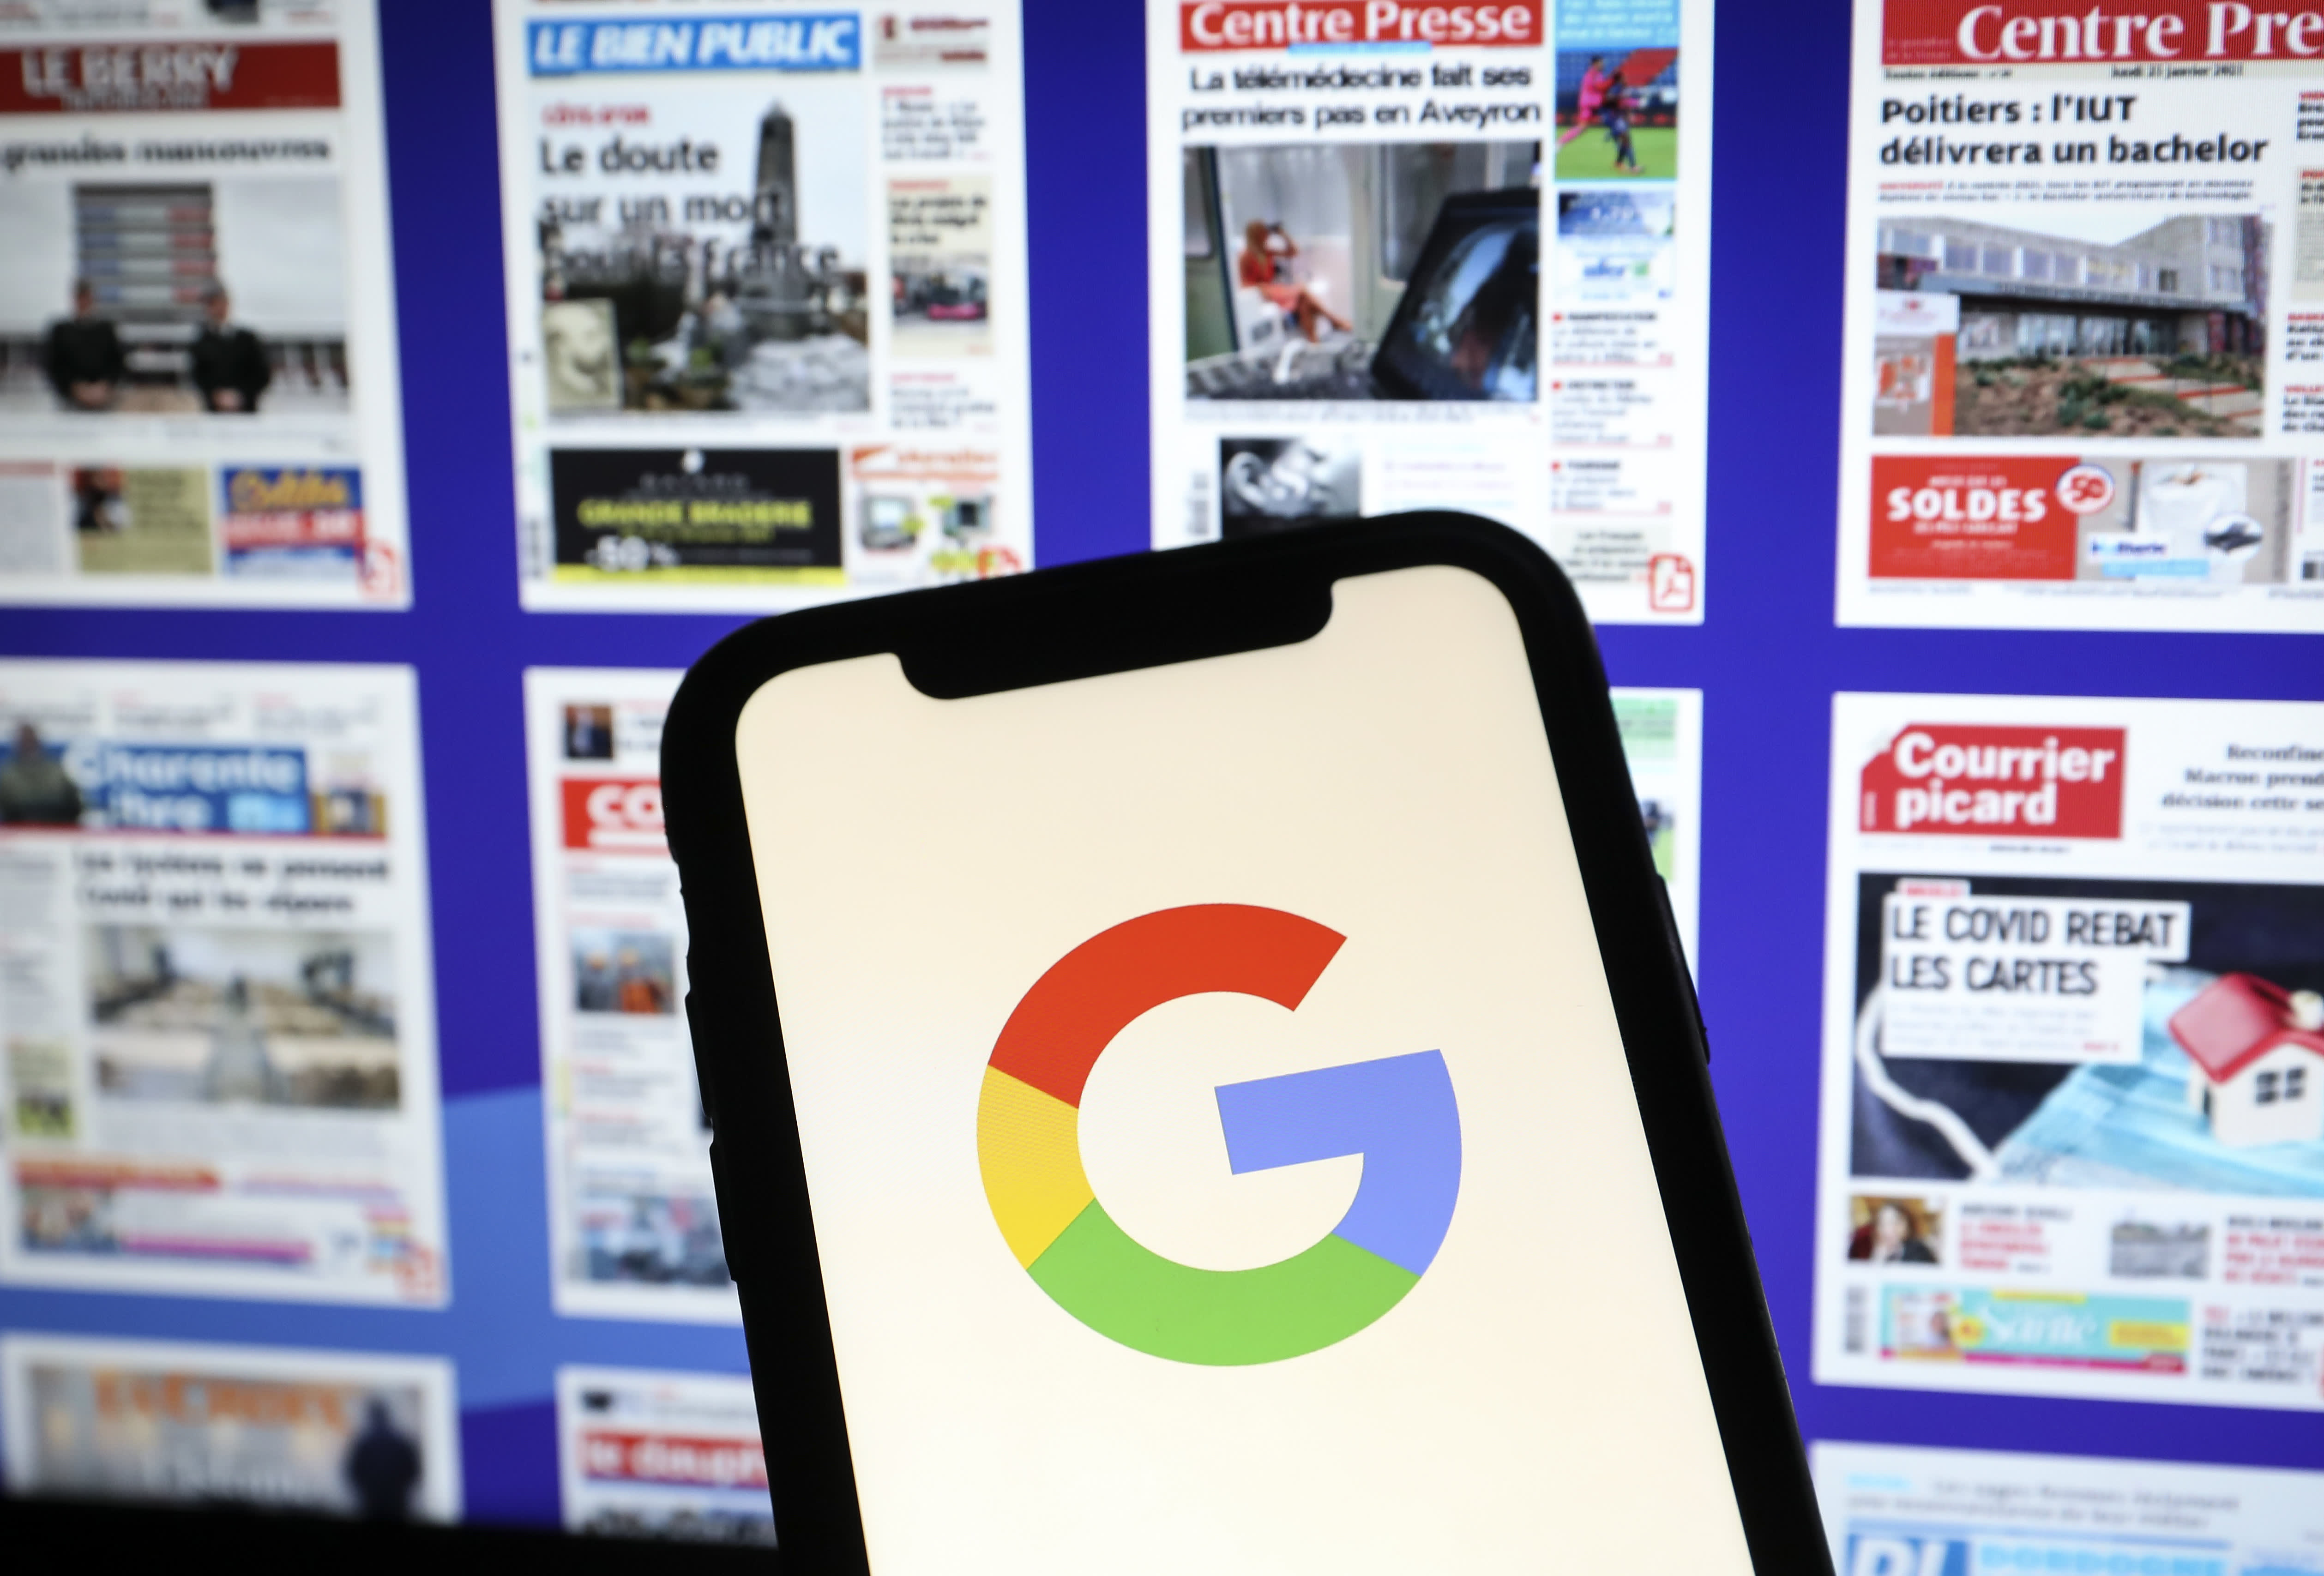 Google was fined 500 million euros ($593 million) Tuesday by French competition regulators for failing to comply with an order to negotiate fair deals